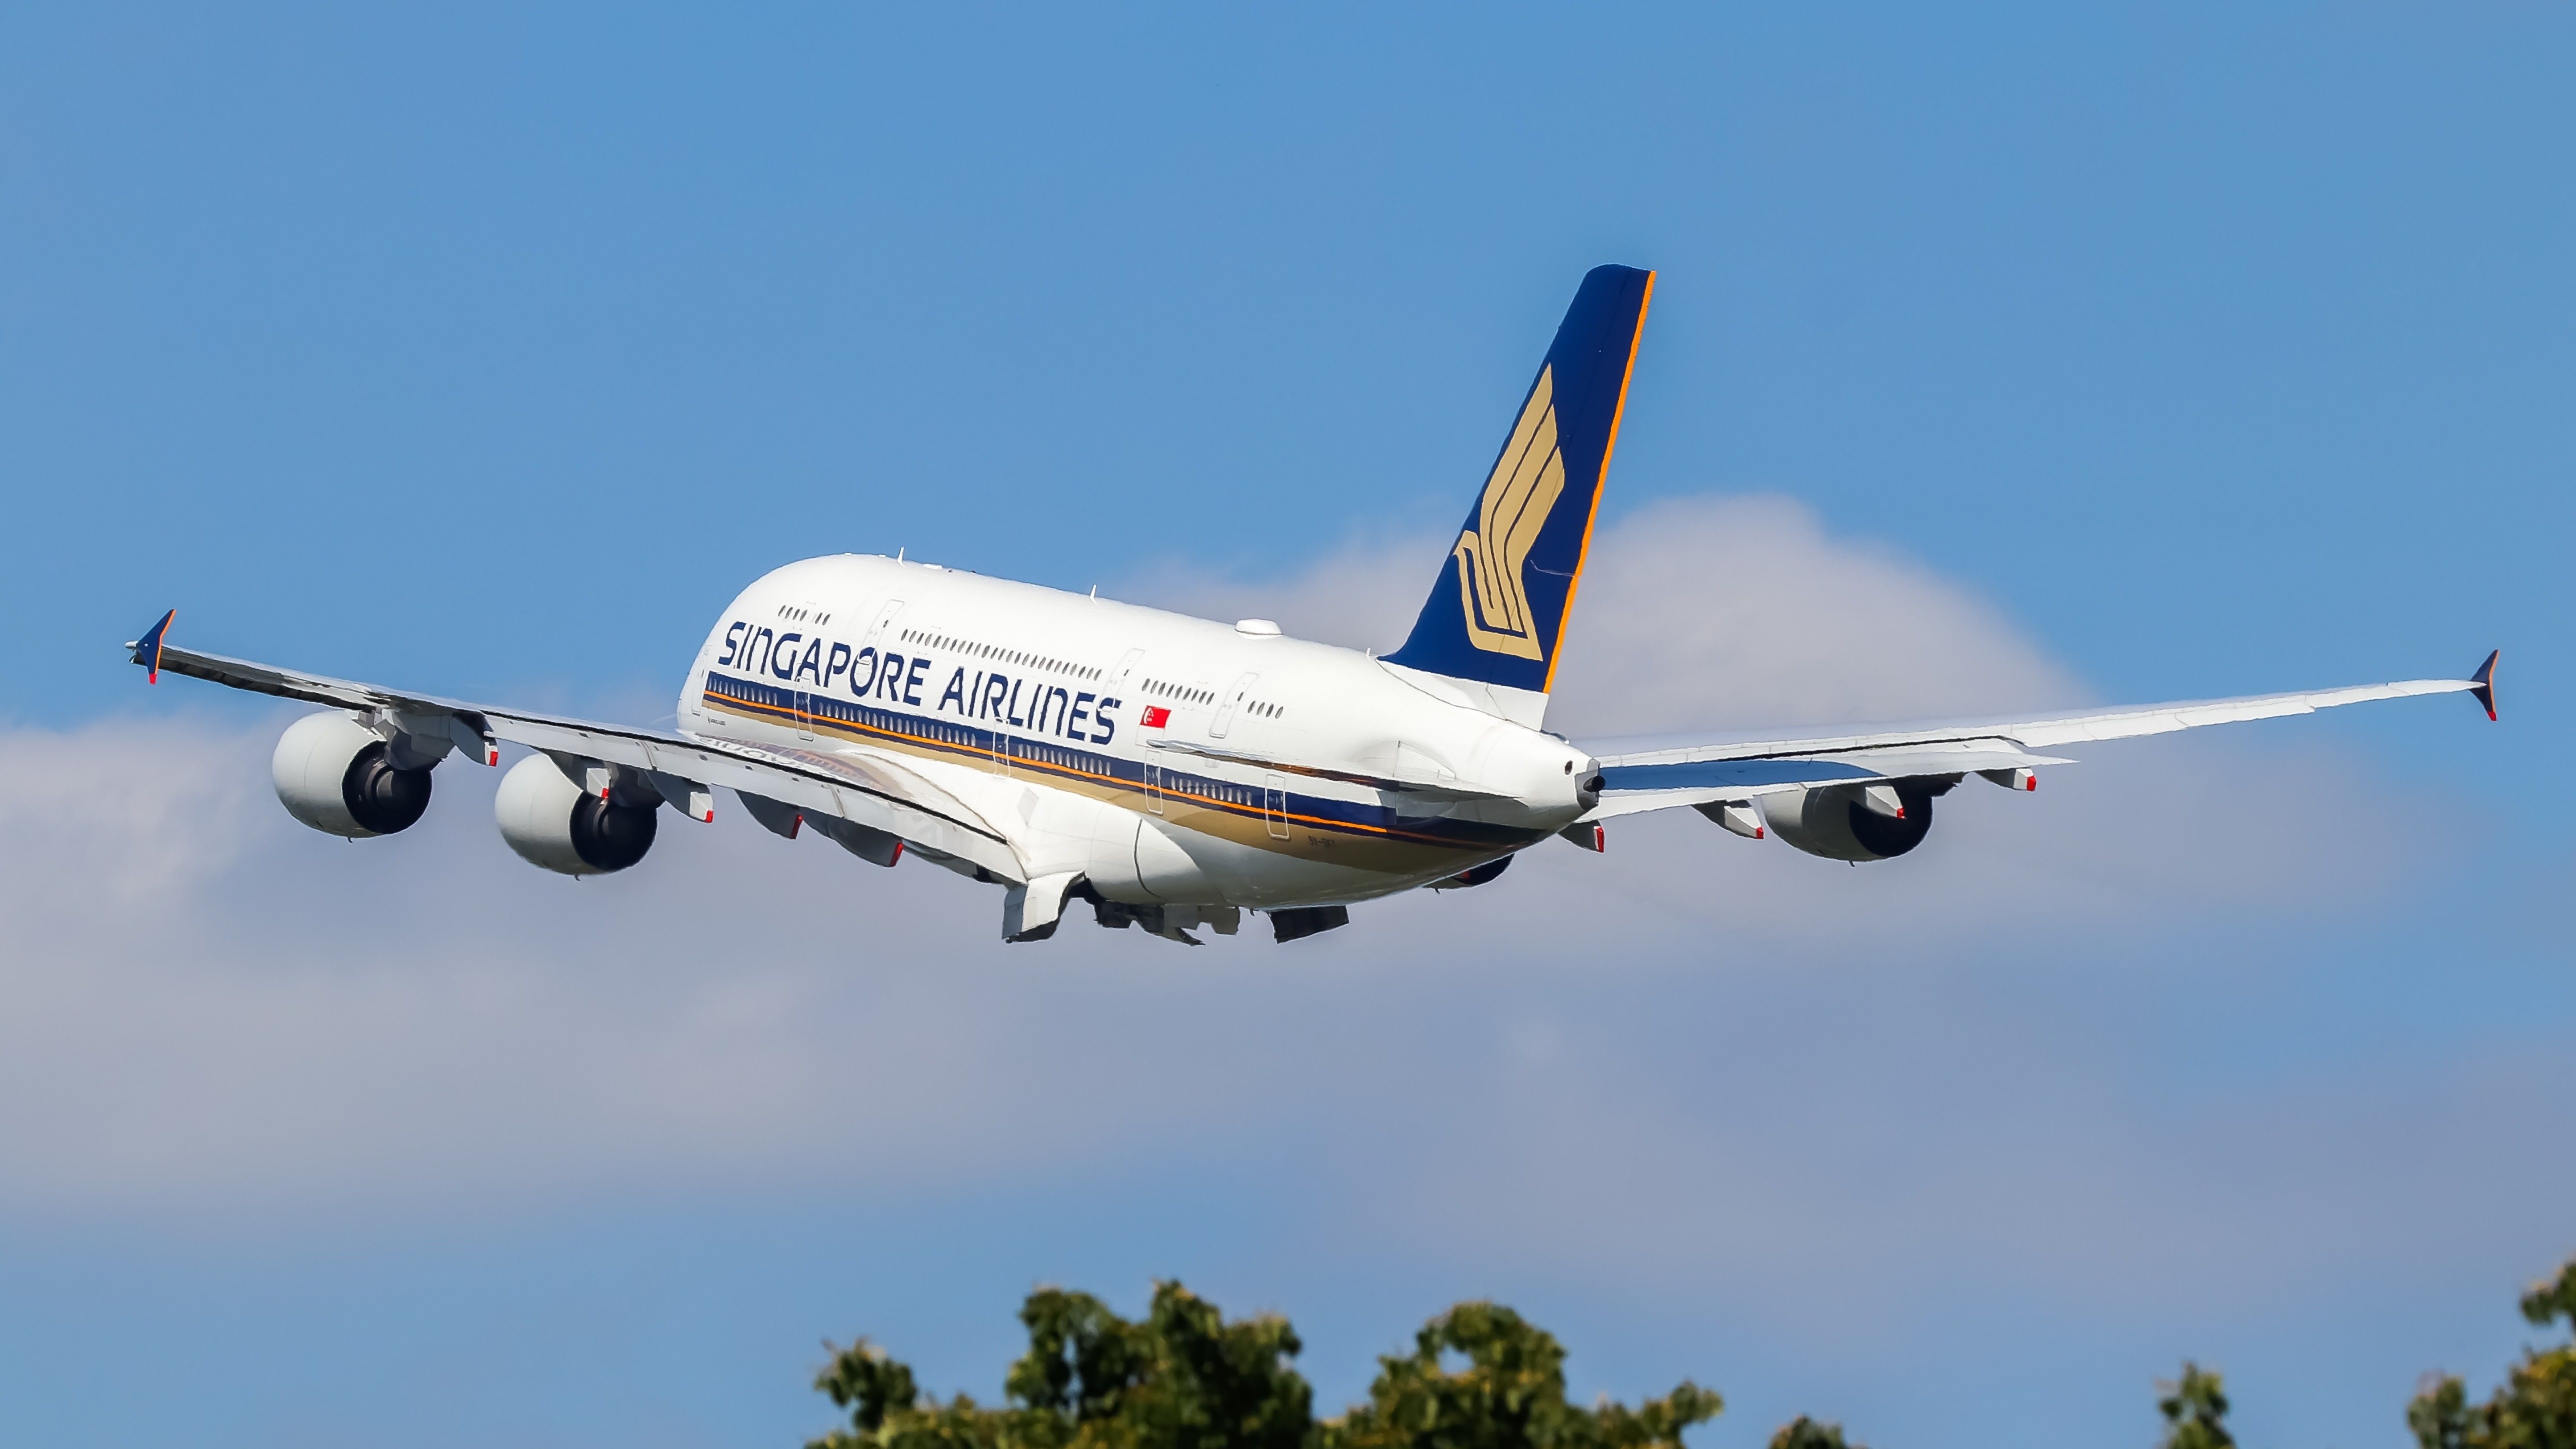 A Singapore Airlines Airbus A380 taking off into the sky